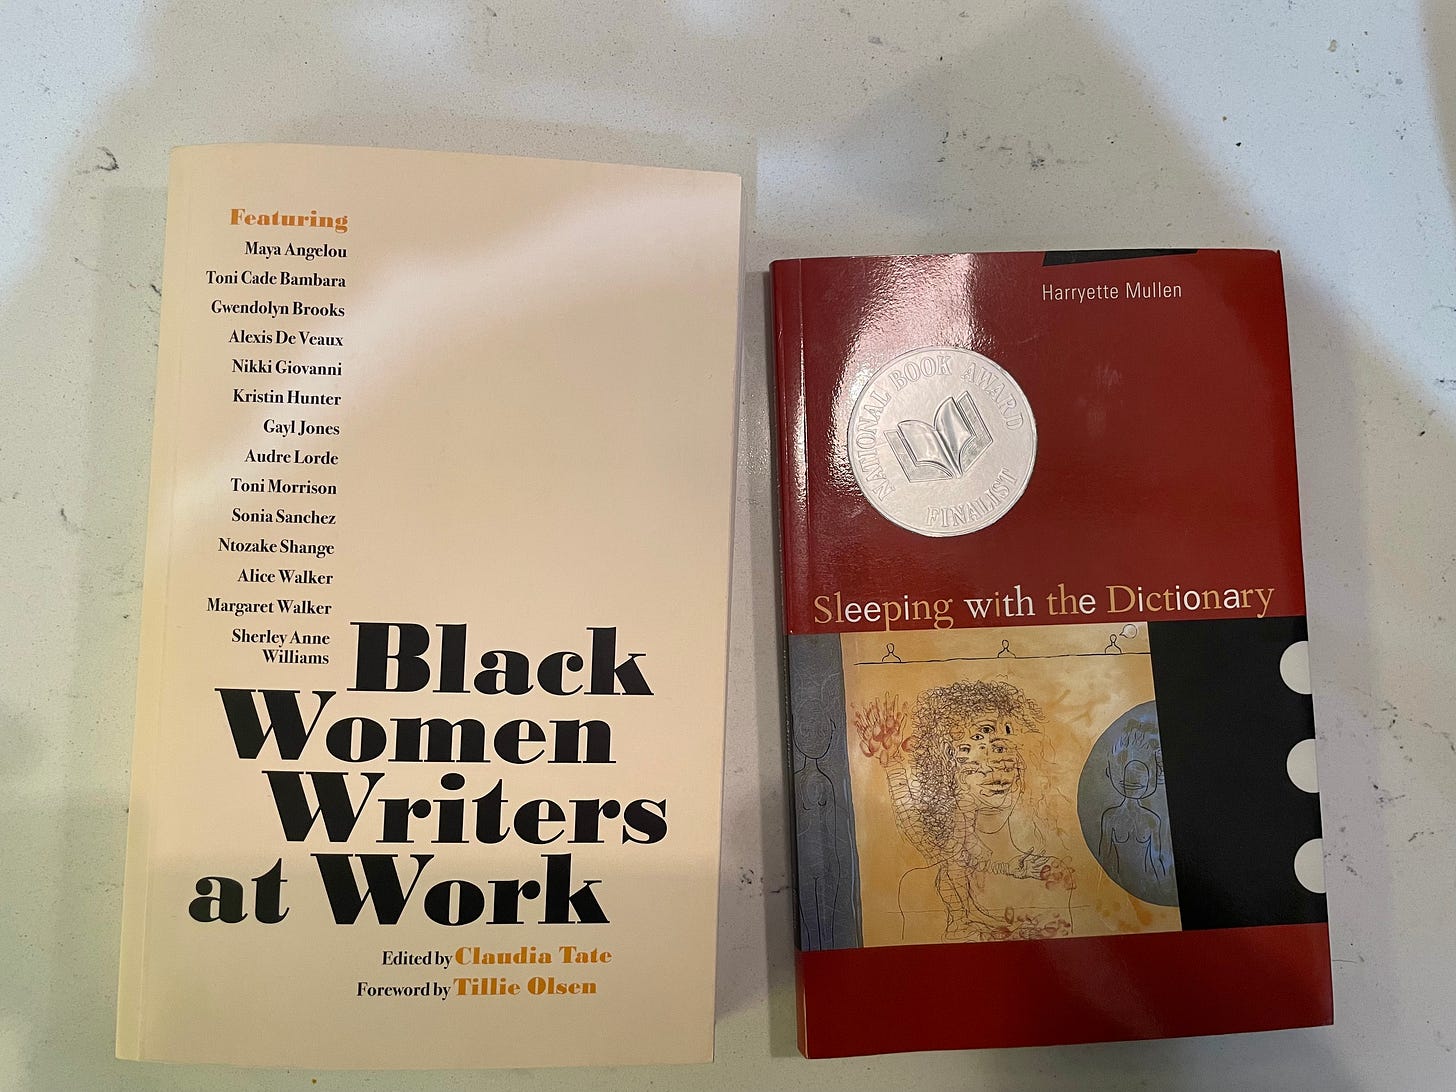 Black Woman Writers At Work edited by Claudia Tate and Sleeping With The Dictionary by Harryette Mullen